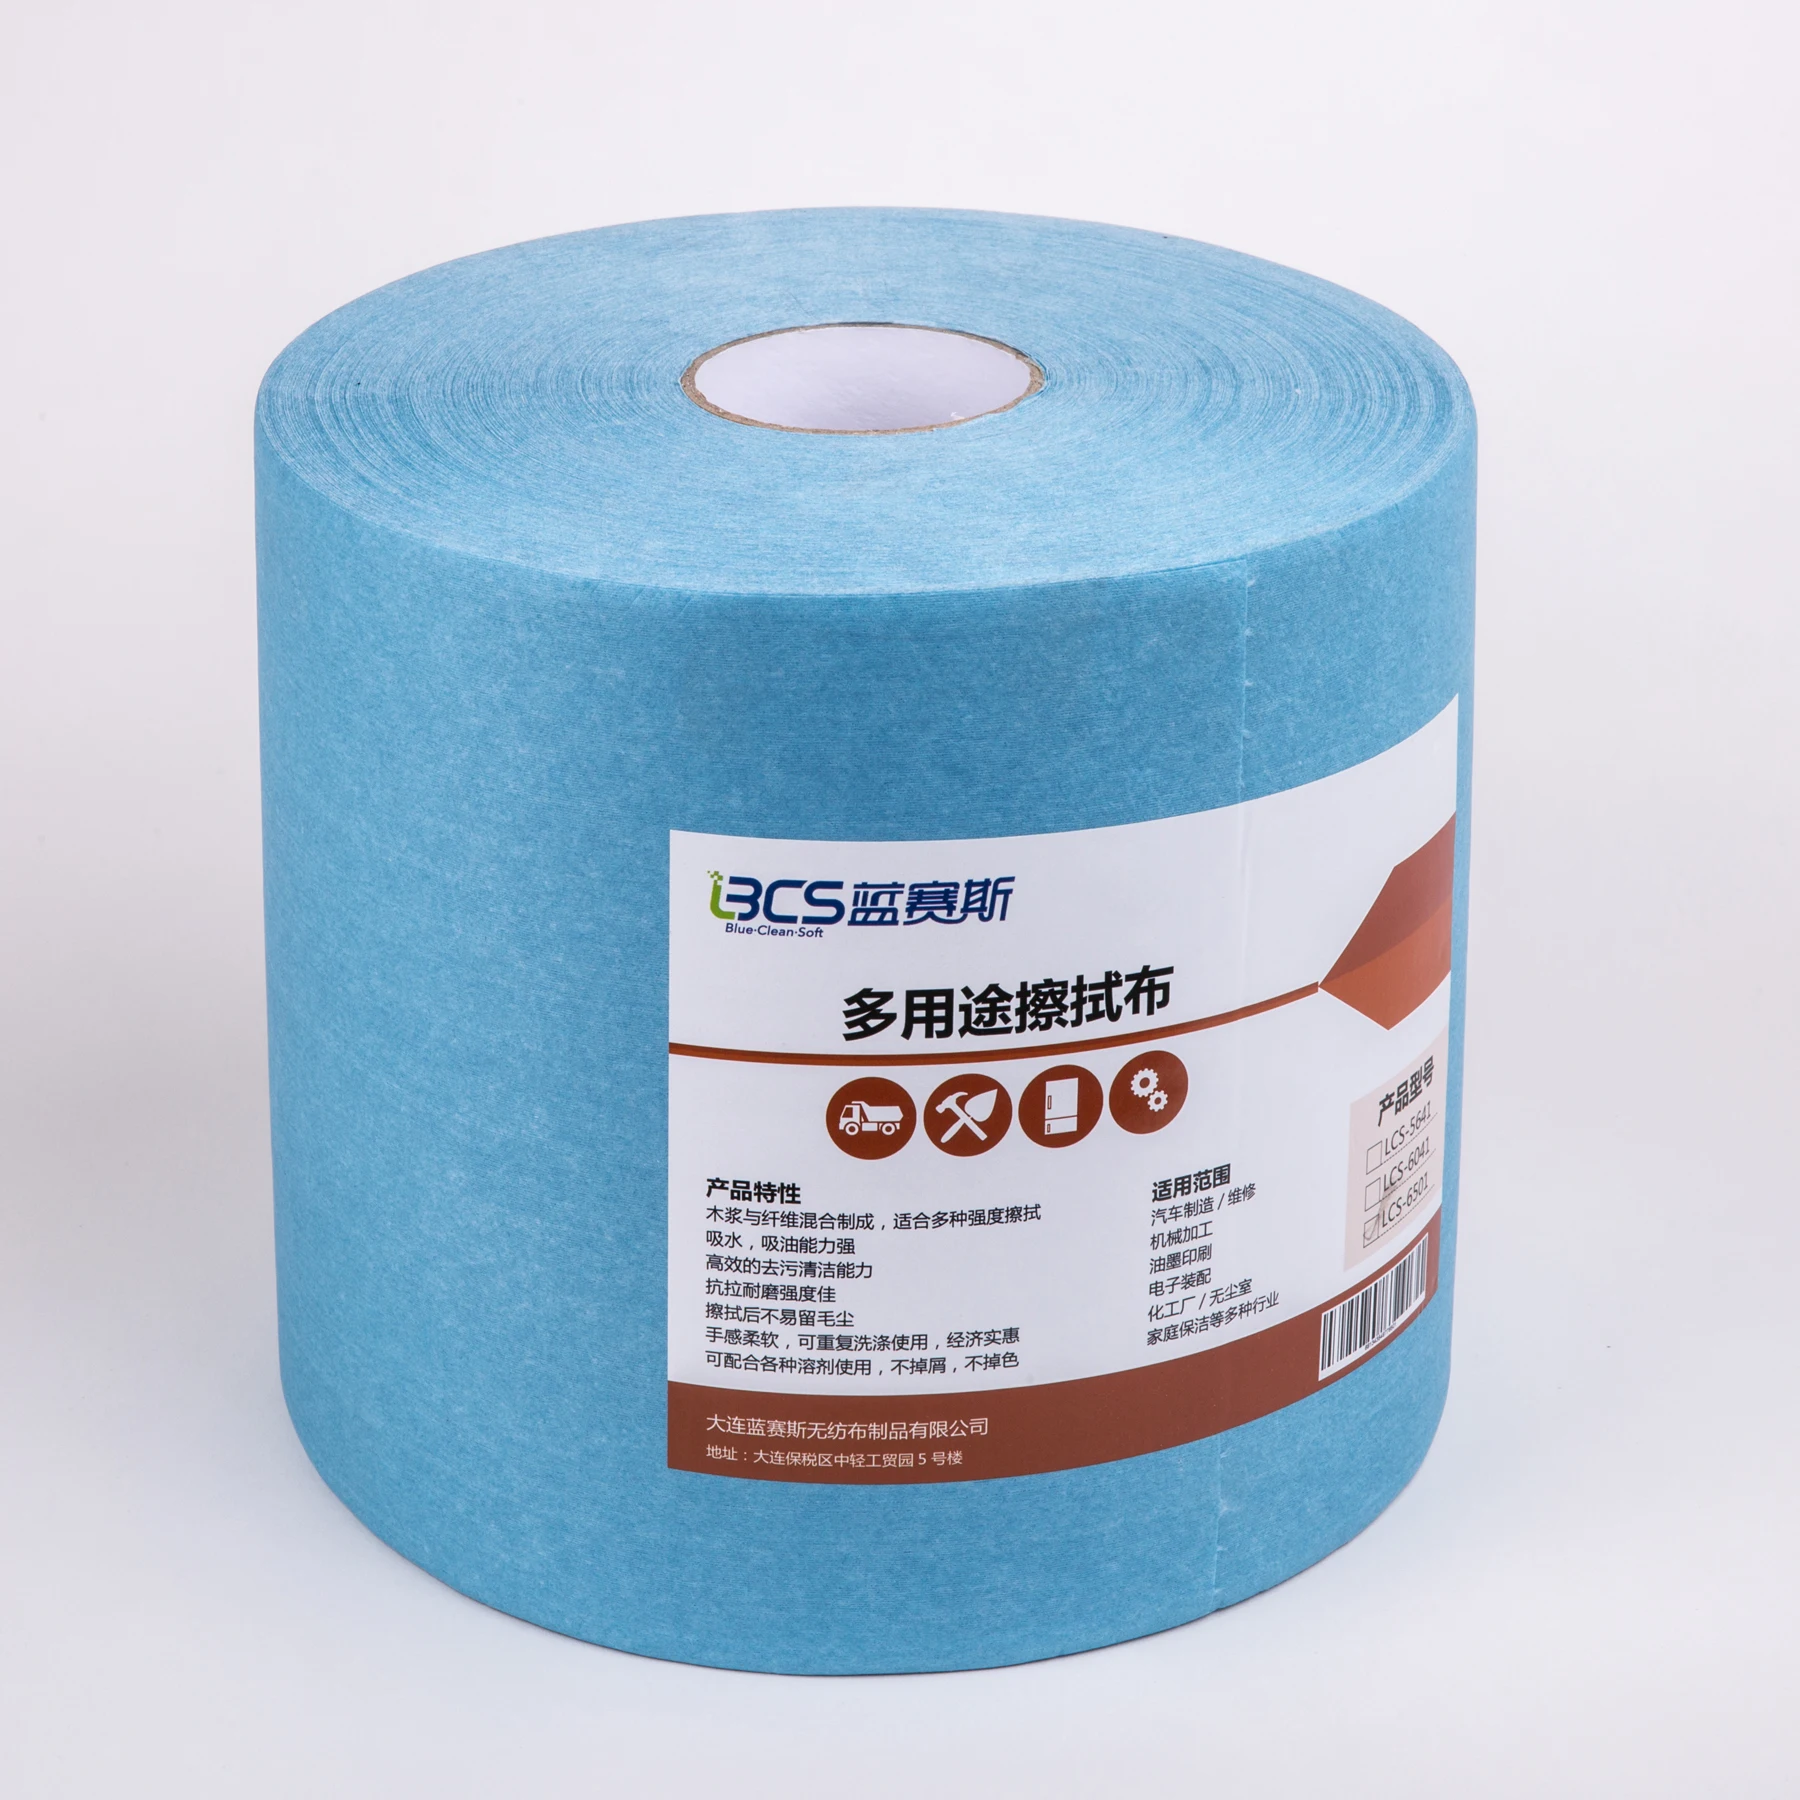 

BCS Lint Free 60gsm 27x35cm Grease Absorbing Industrial Blue Industrial Cleanroom Workshop Dust Free Cleaning Wipes Roll